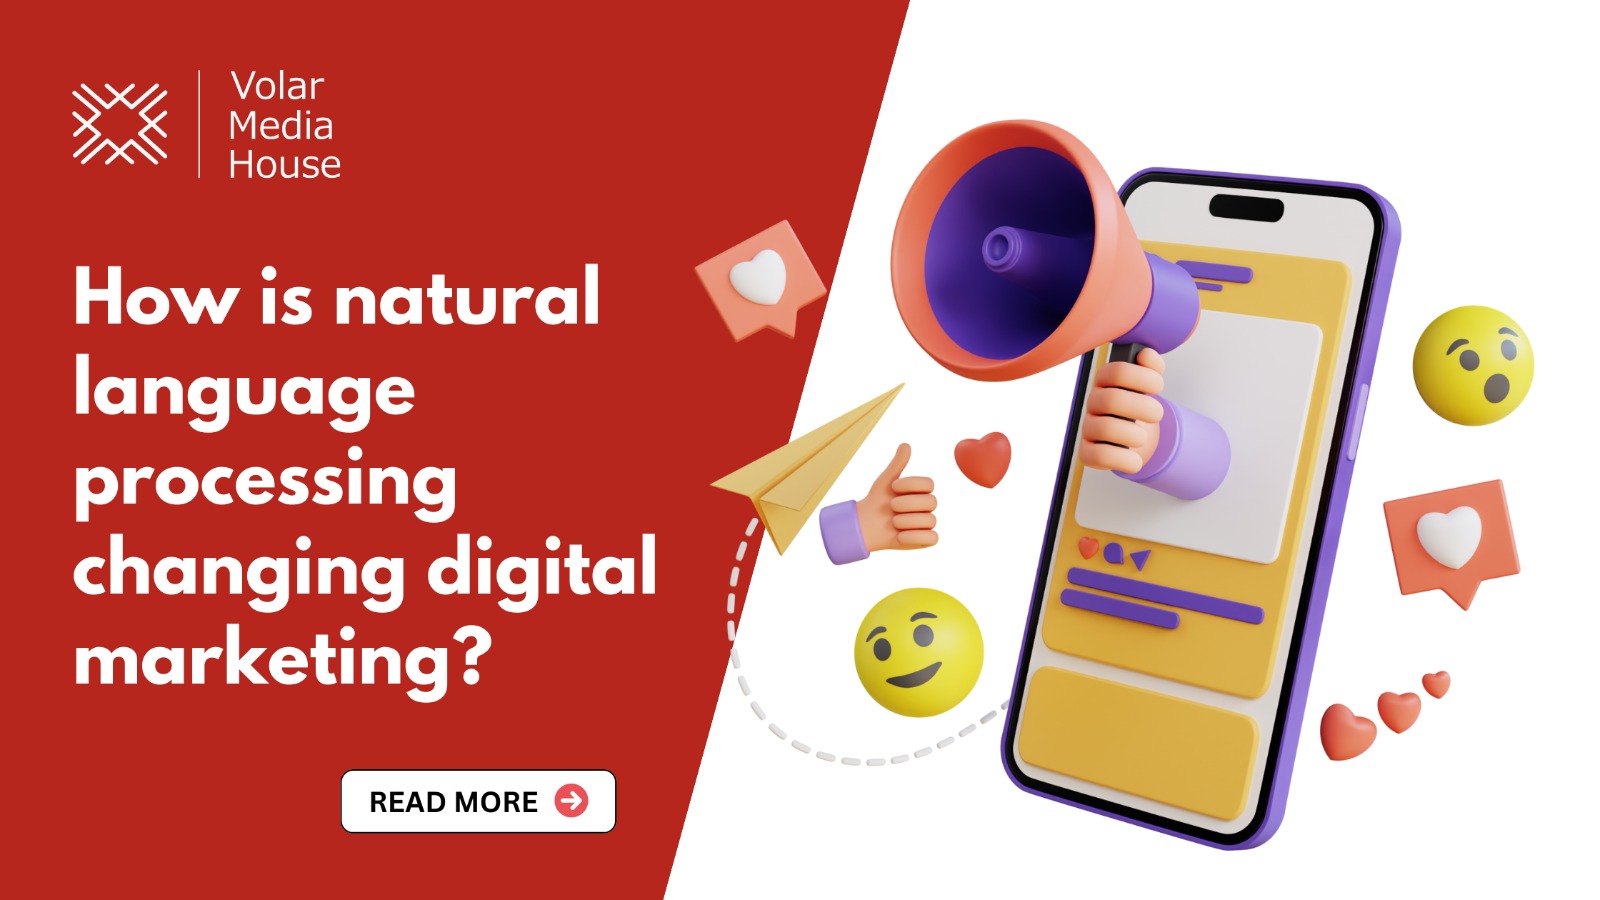 How Is Natural Language Processing Changing Digital Marketing?